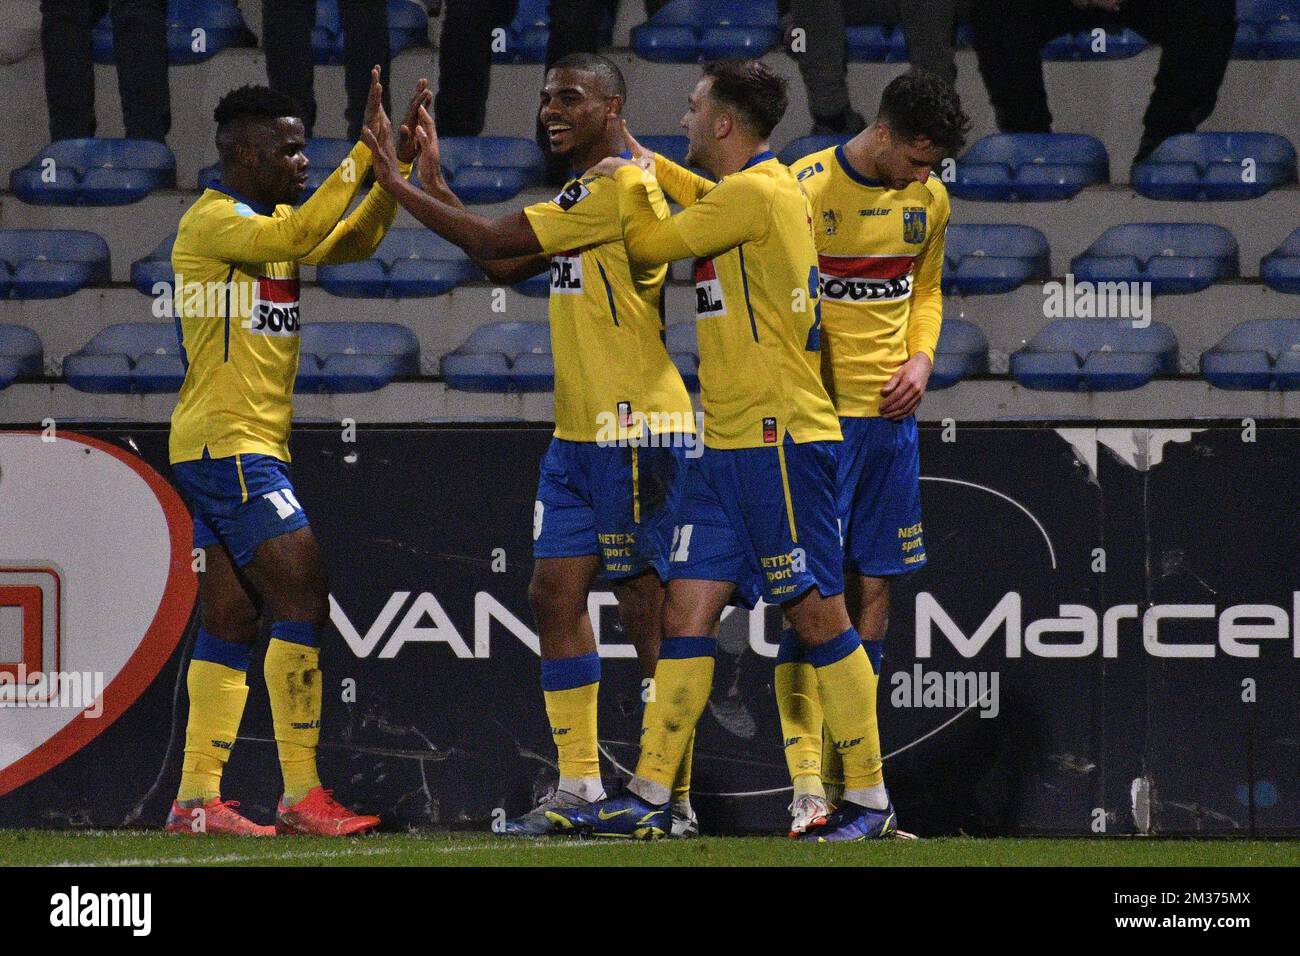 Westerlo's Kouya Mabea, Westerlo's Lyle Foster, Westerlo's Erdon Daci and Westerlo's Kyan Vaesen celebrate after scoring during a soccer match between Westerlo and RE Mouscron, Sunday 05 December 2021 in Westerlo, on day 14 of the 'D1B Pro League' second division of the Belgian soccer championship. BELGA PHOTO DAVID PINTENS Stock Photo